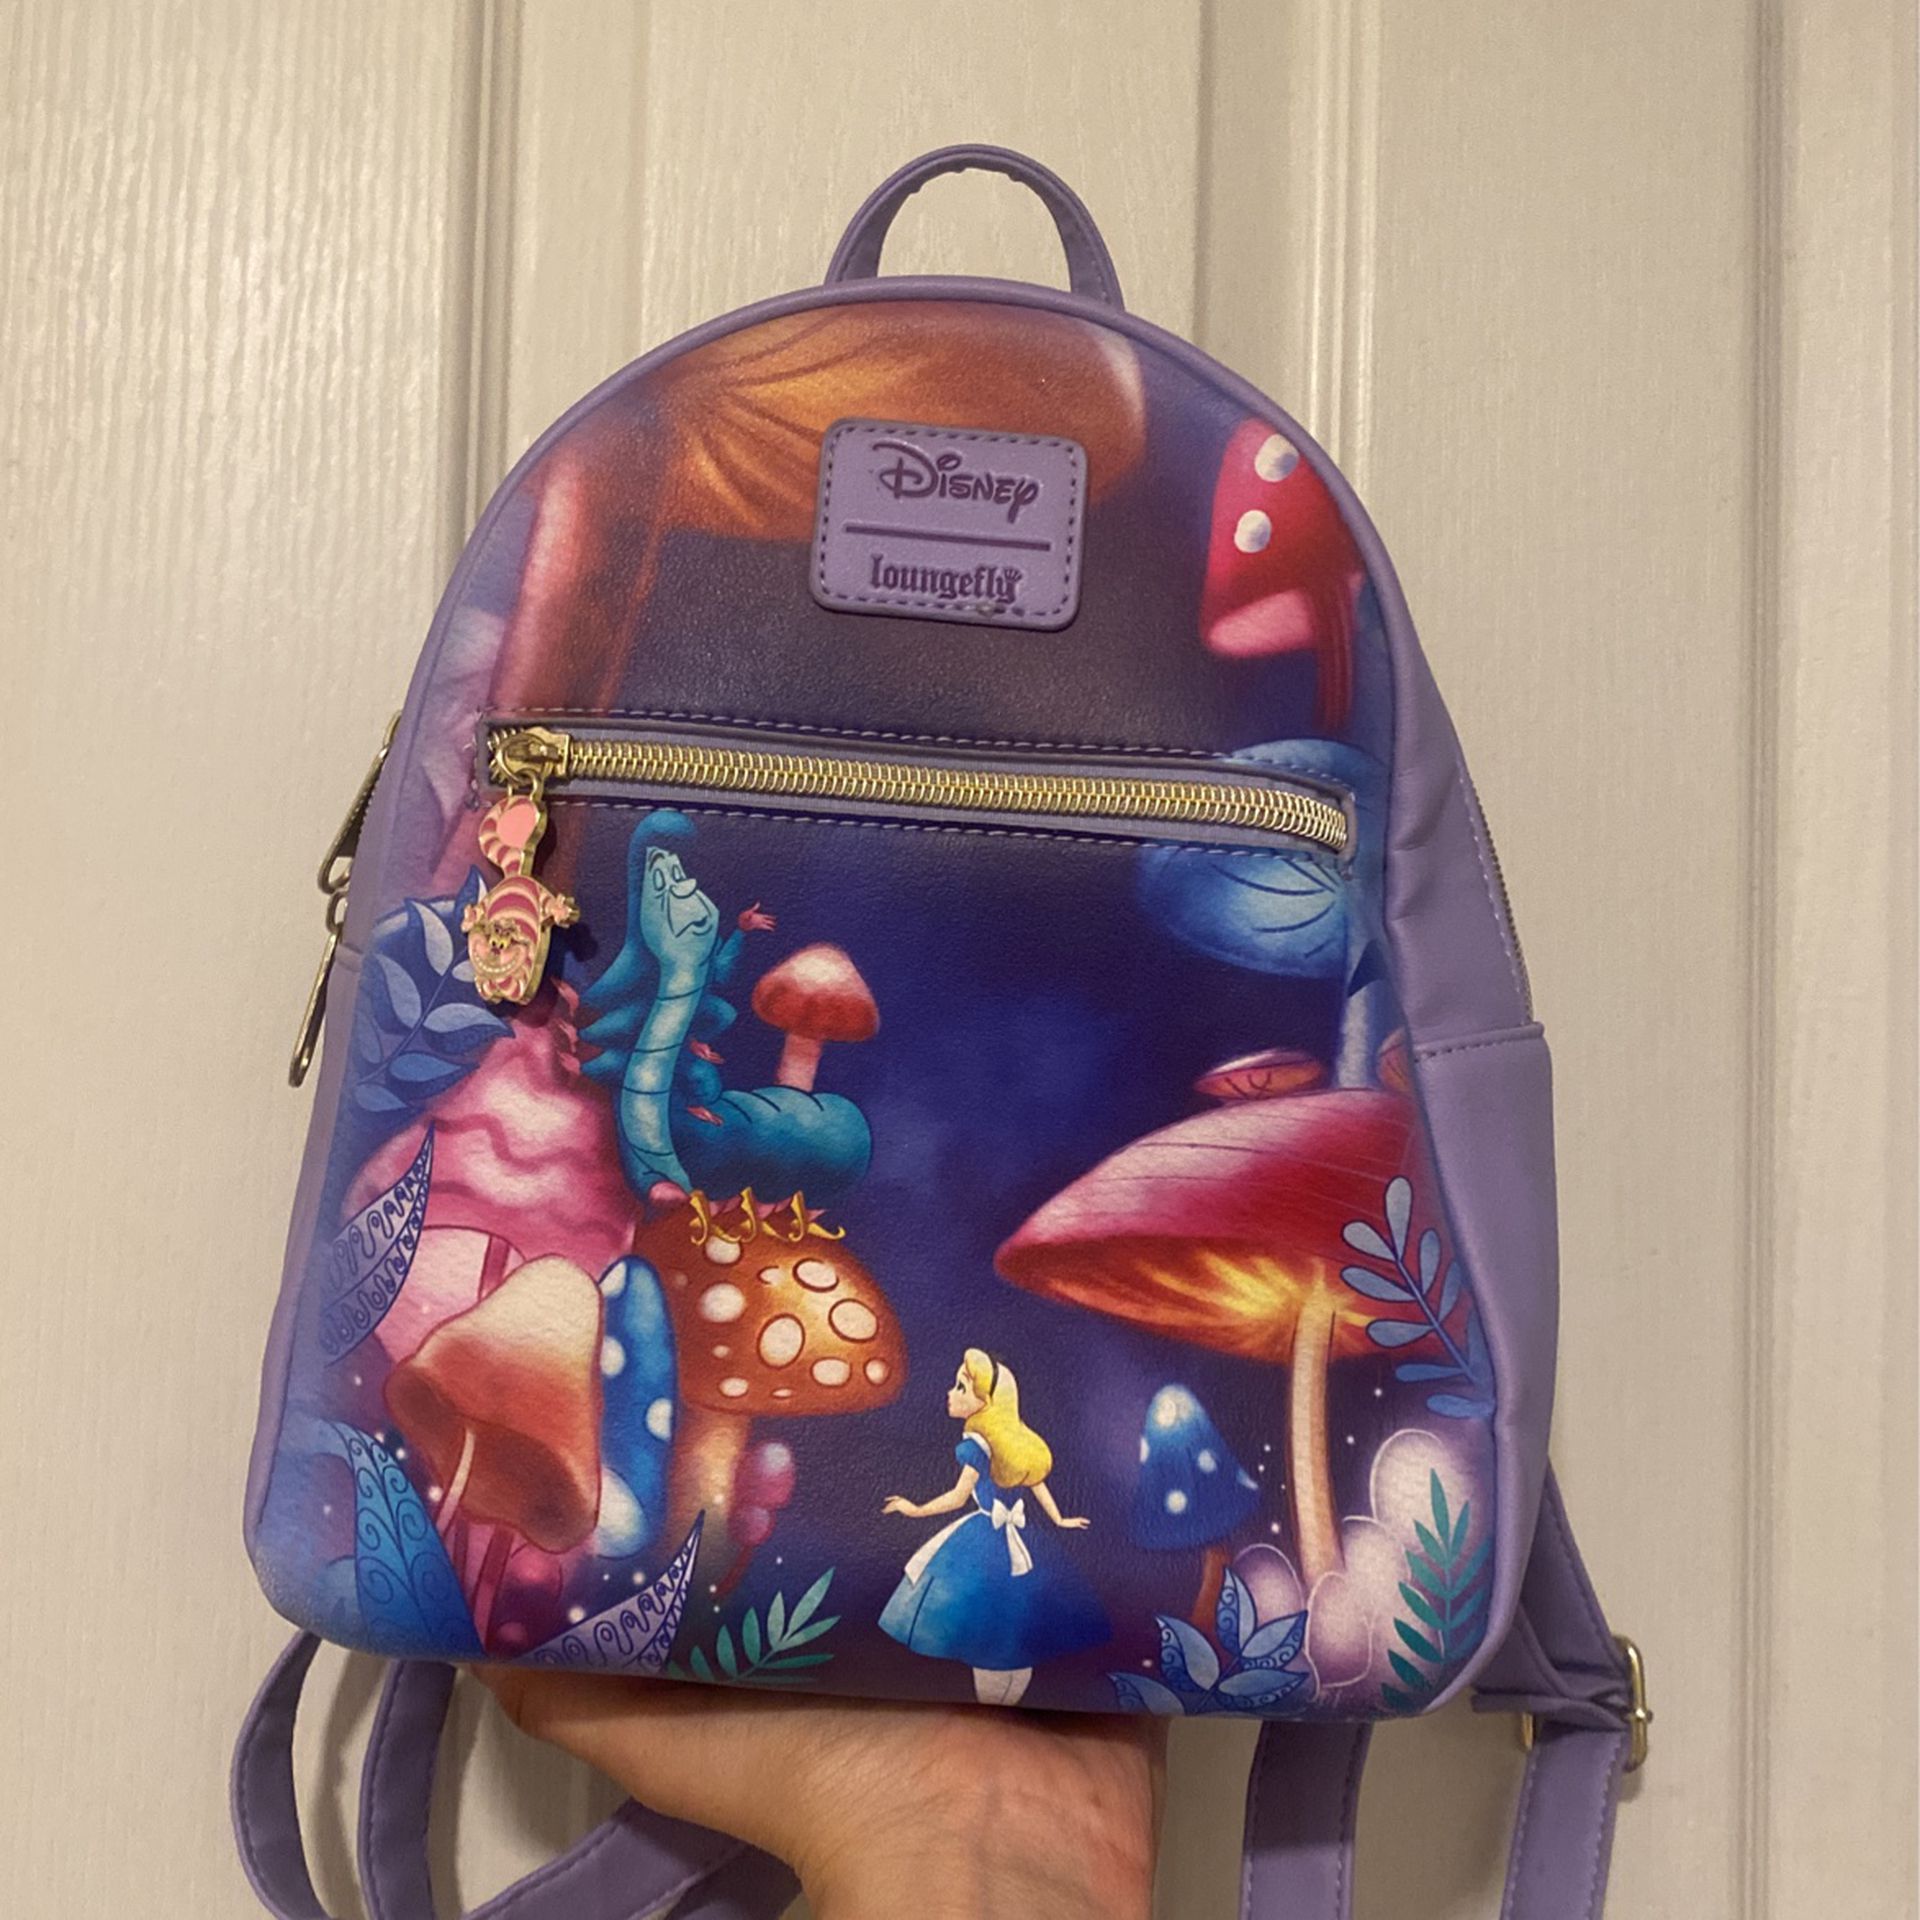 Loungefly backpack Alice in Wonderland with Cheshire Cat zipper charm 